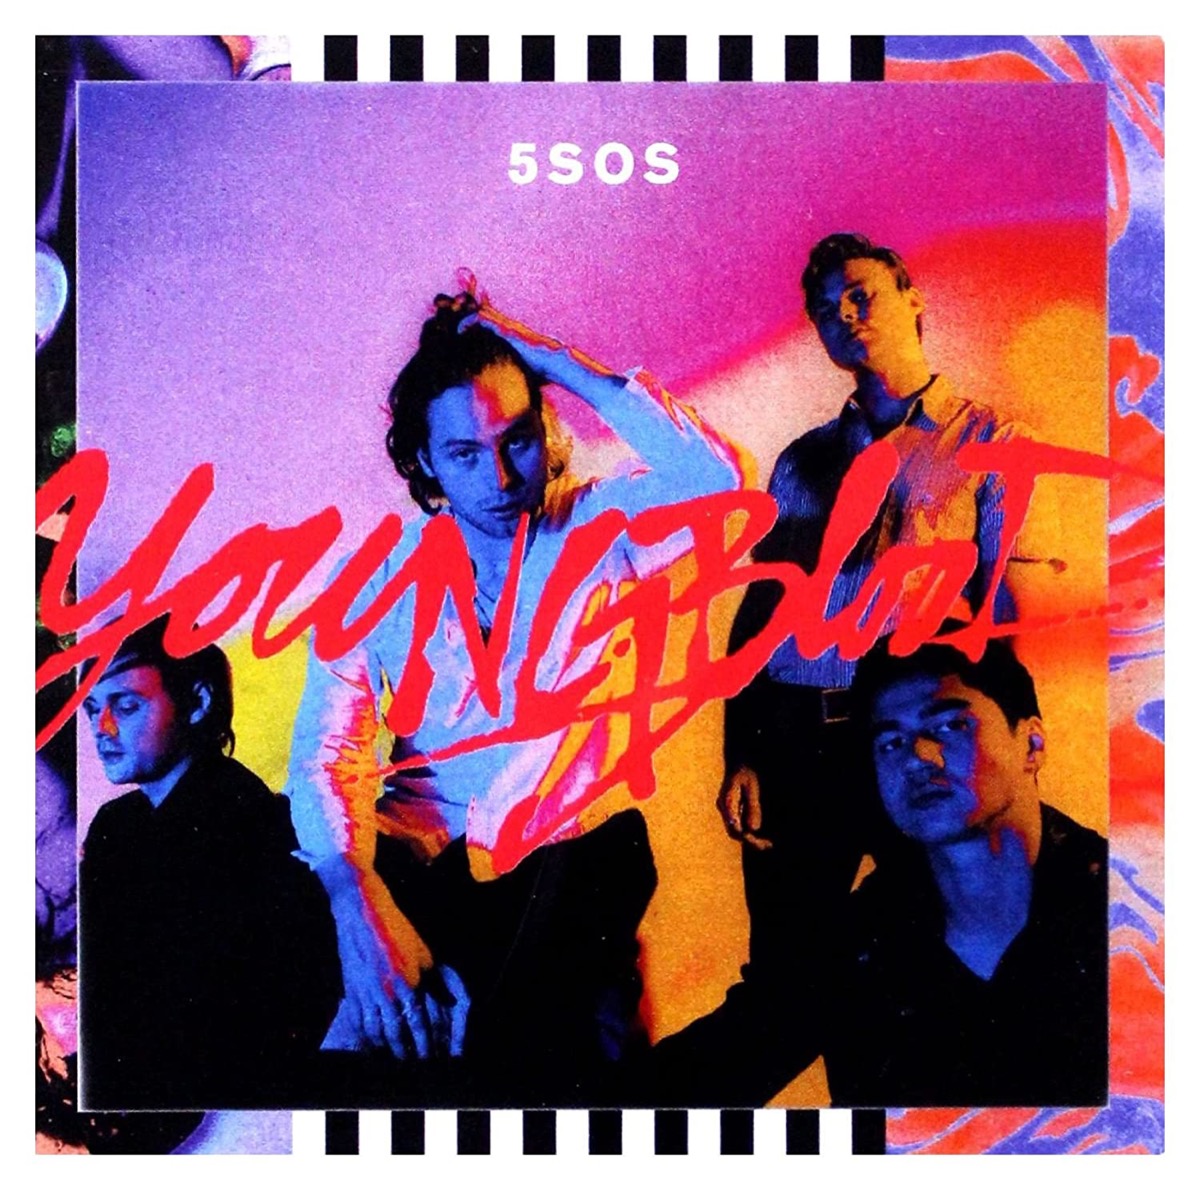 Single cover art for "Youngblood" by 5 Seconds of Summer